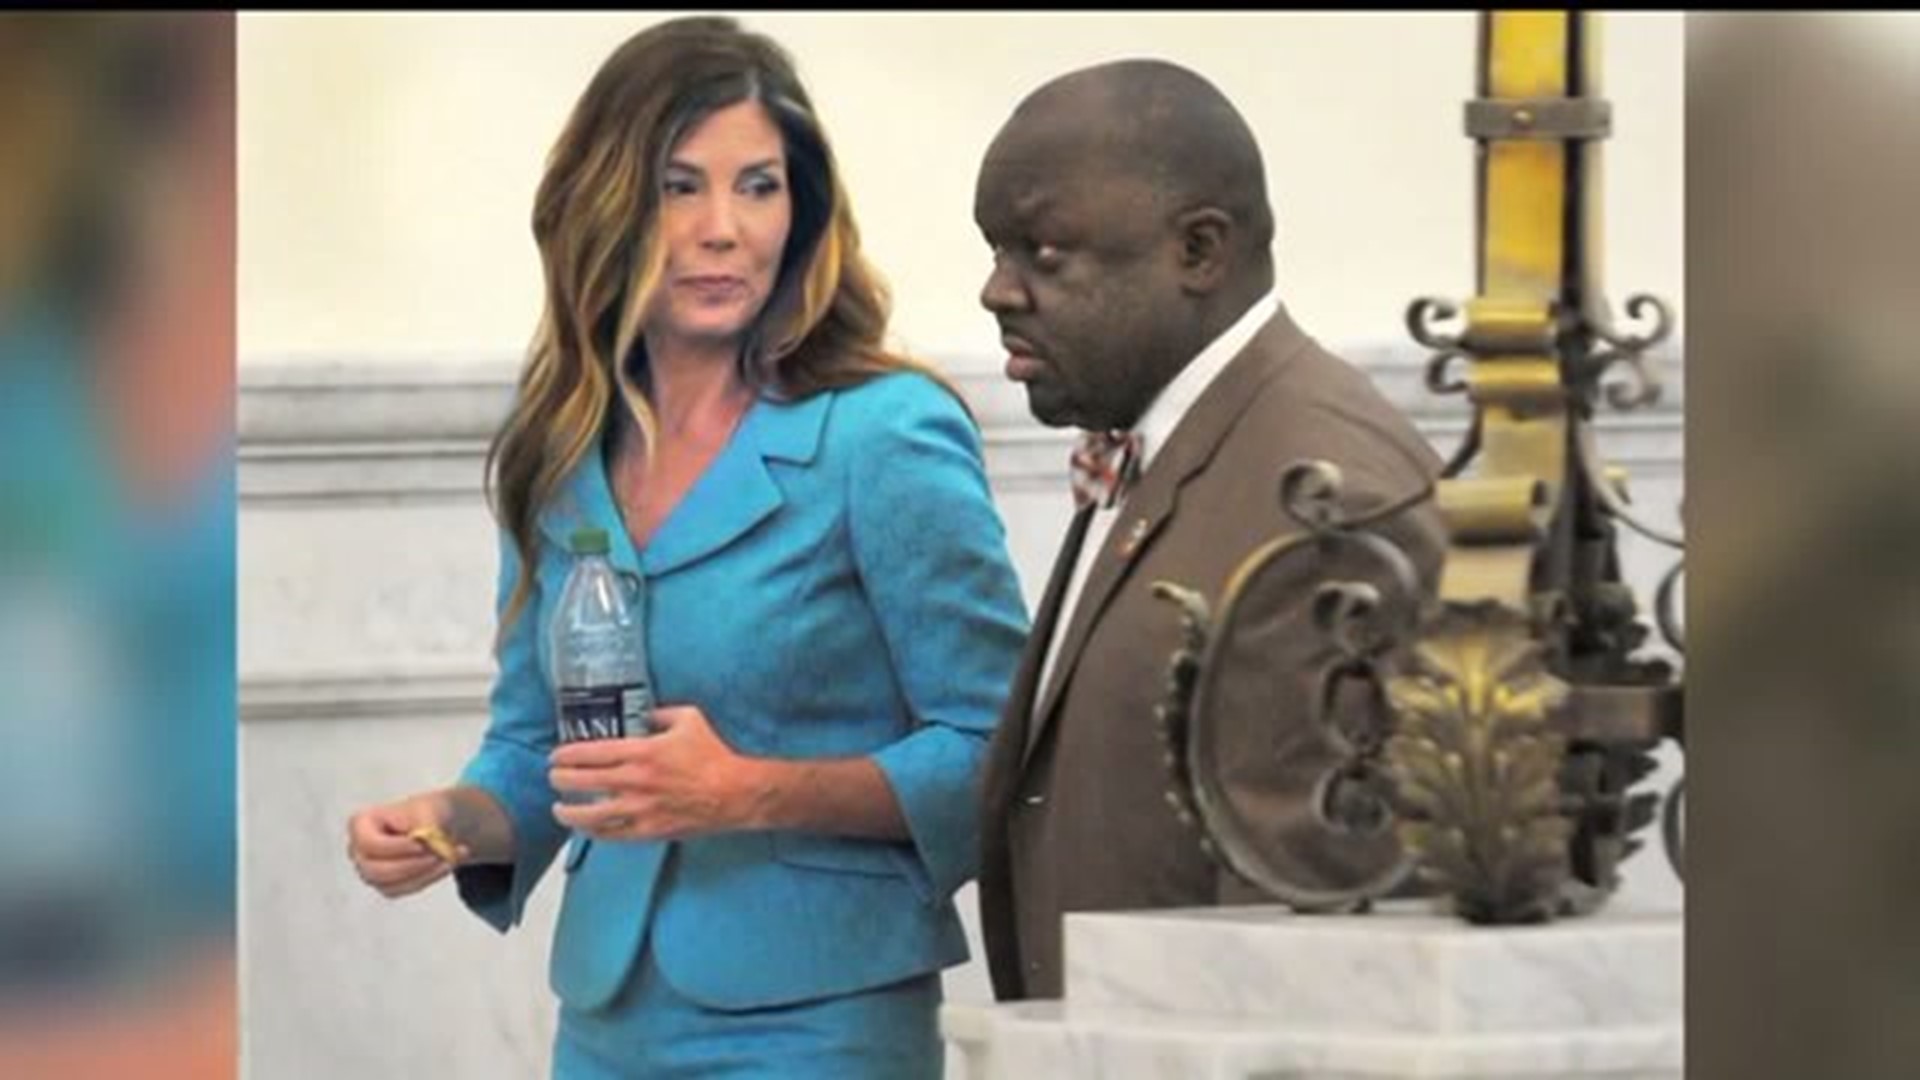 GUILTY: Attorney General Kane convicted of perjury, other crimes, jury says